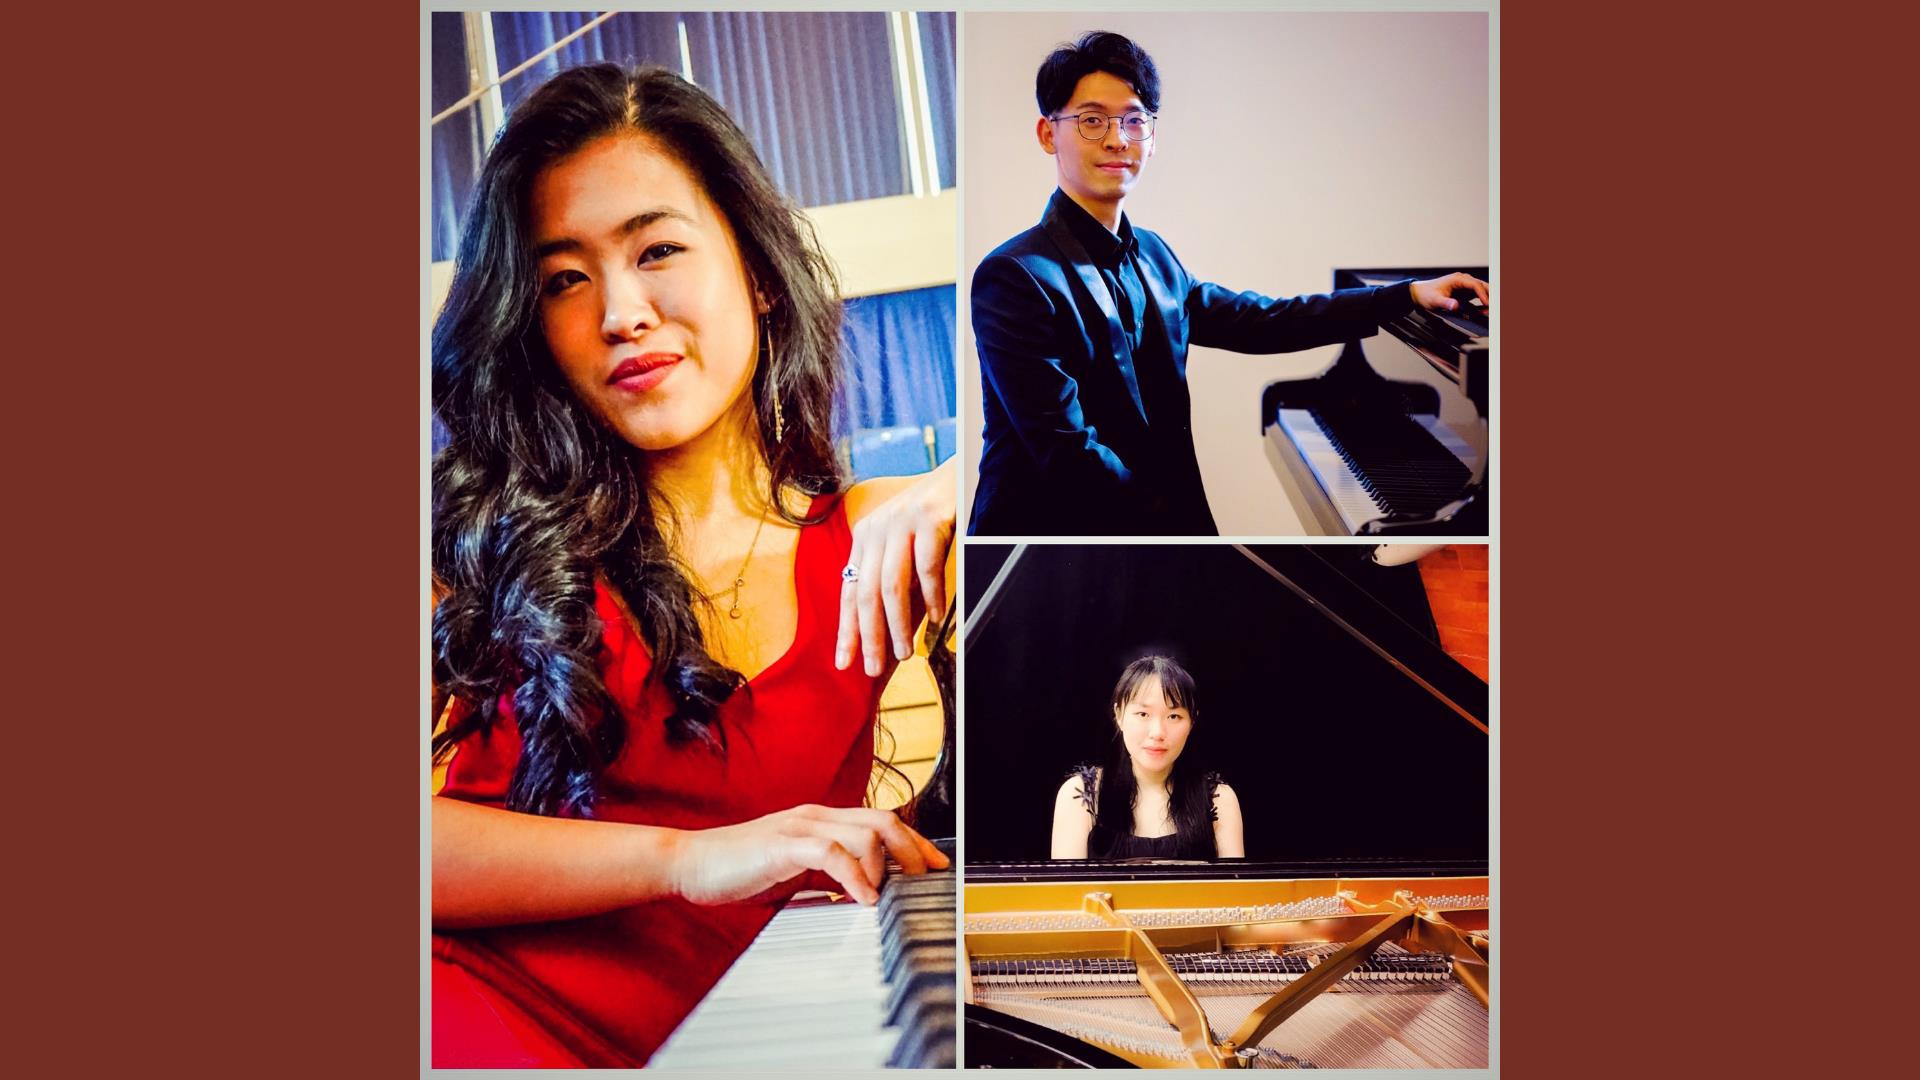 Promotional image for the Concerto Prize event, showing the three finalists who will be competing.